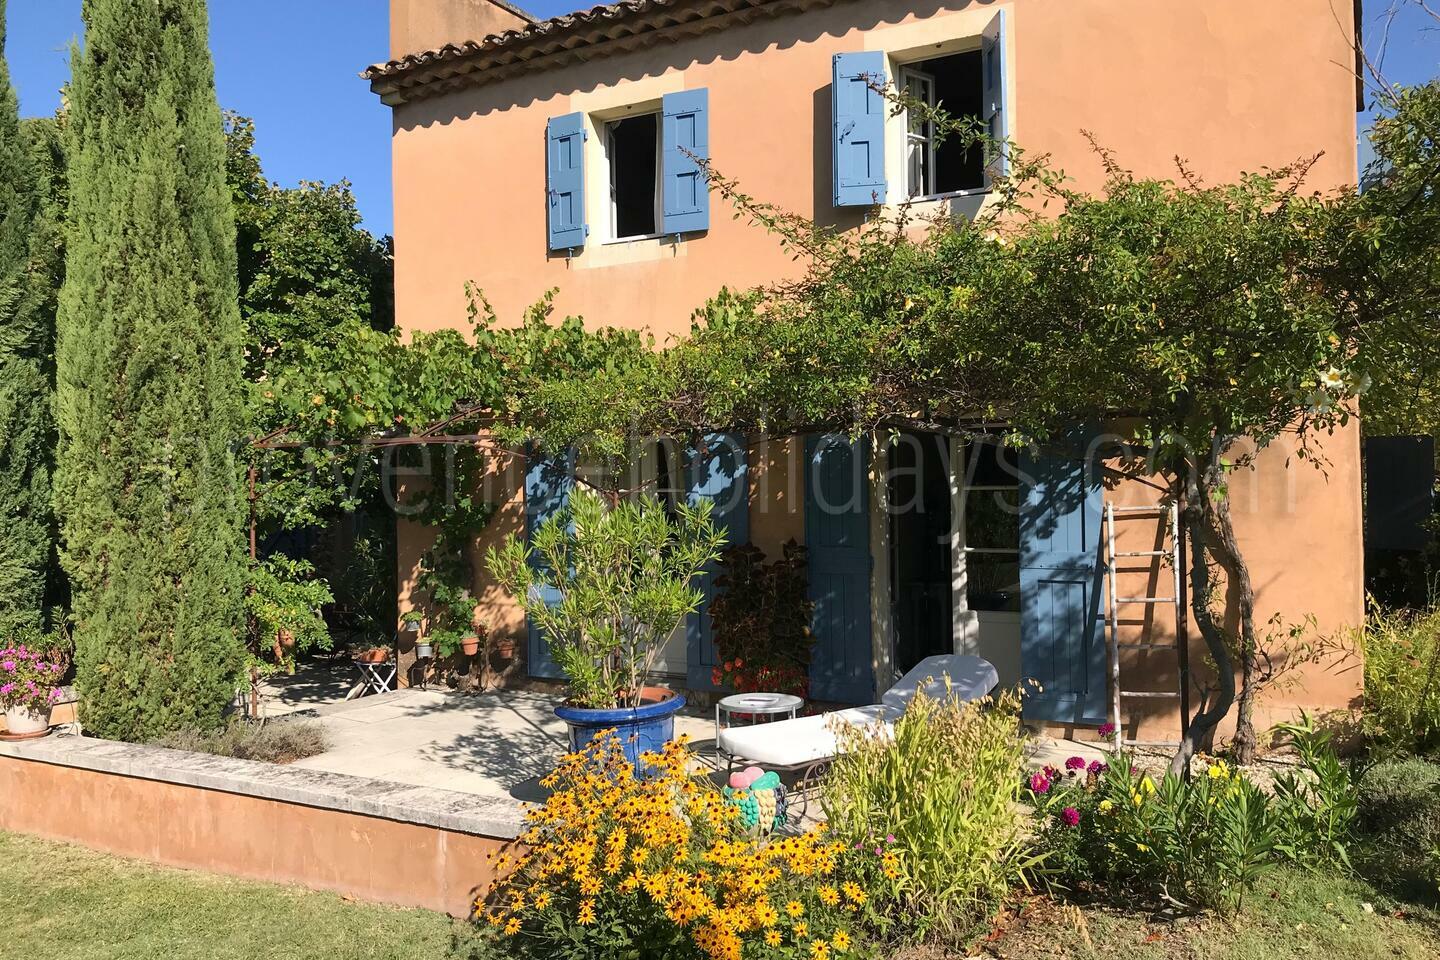 Authentic Holiday Rental with Private Pool in the Luberon -1 - La Maison des Vignes: Villa: Exterior